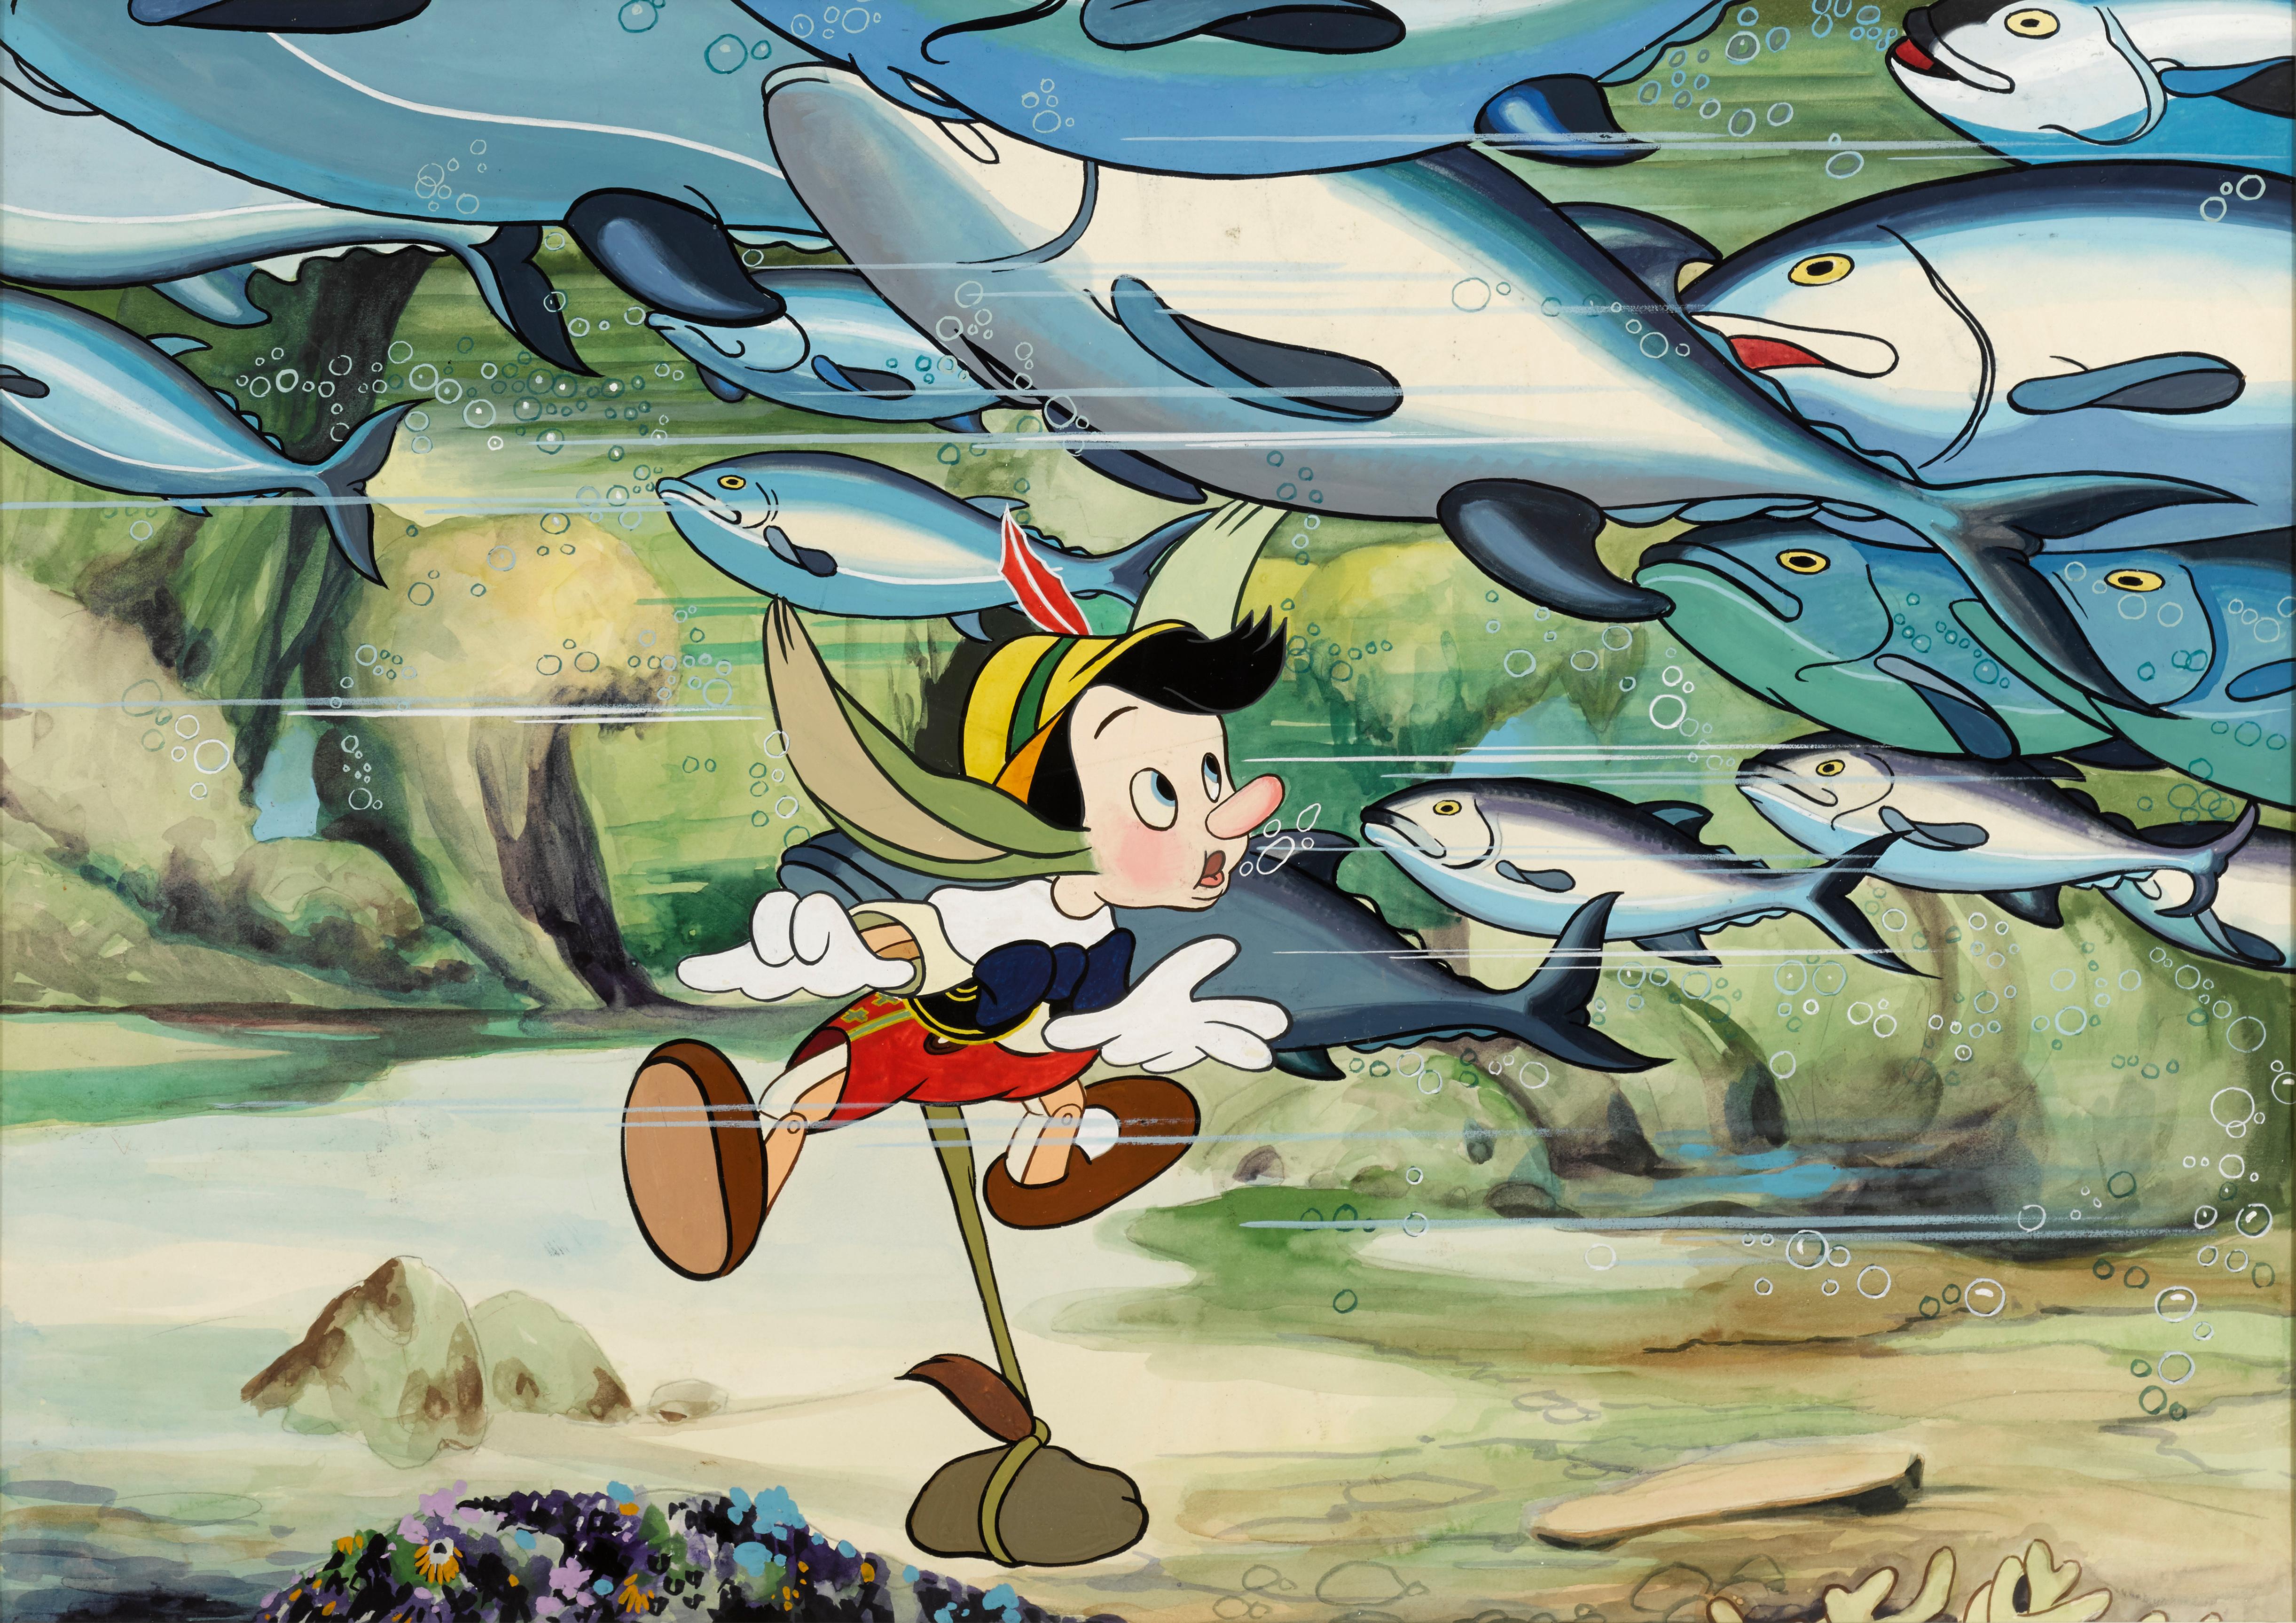 Original artwork used to create the British front of house stills. Gouache on artboard.
This original artwork features the films scene where Pinocchio is under the sea.
Exceptionally rare. Original artworks rarely surface, as the majority were